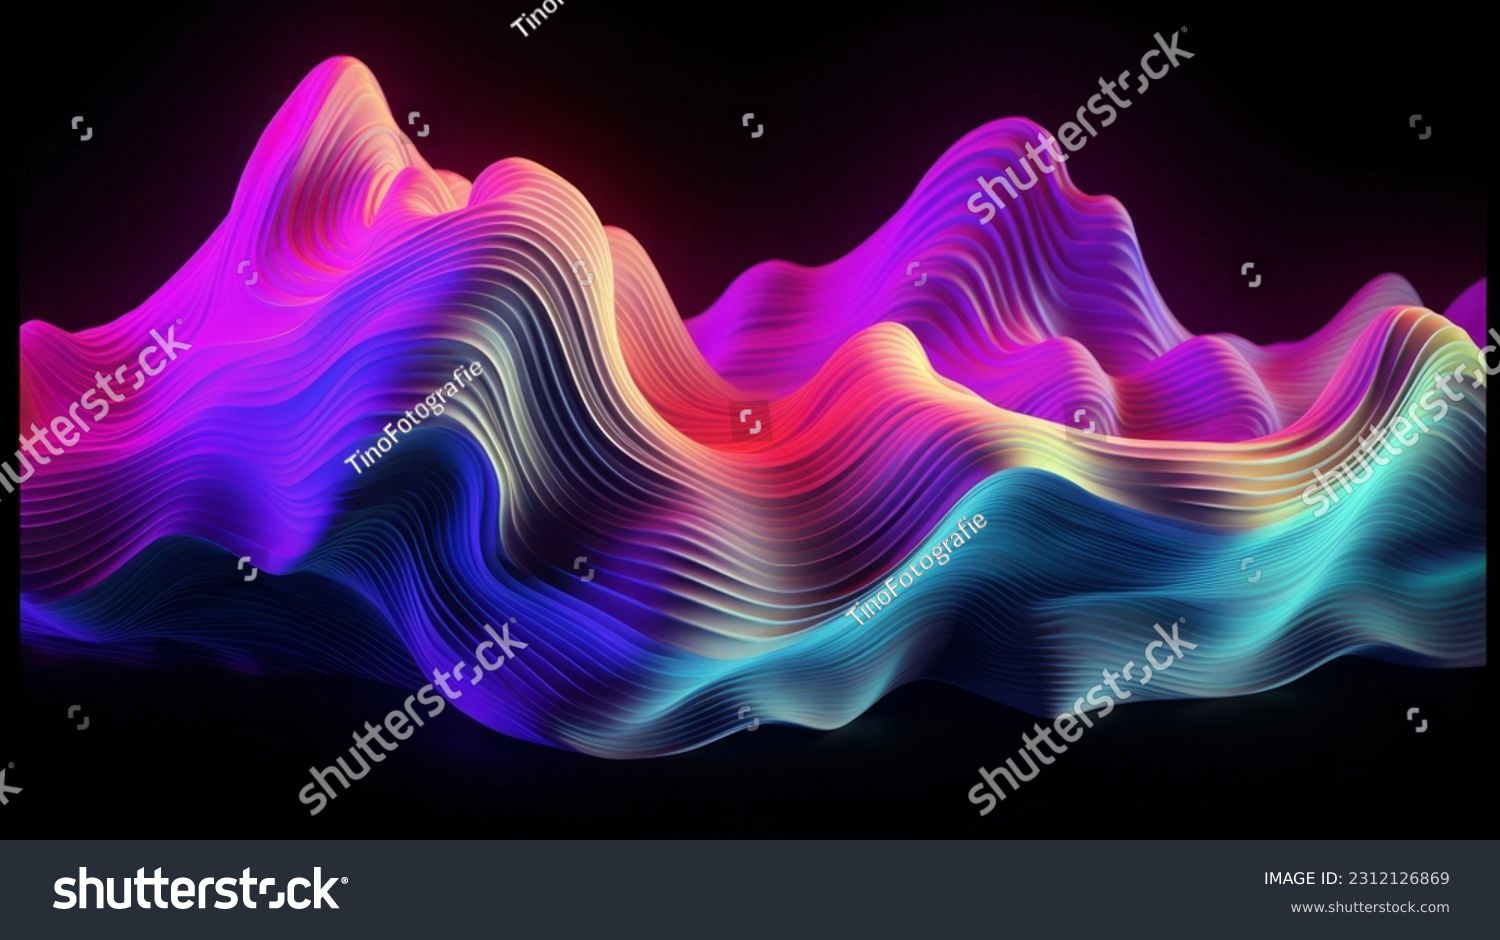 Holographic Neon Fluid Waves. High quality photo #2312126869